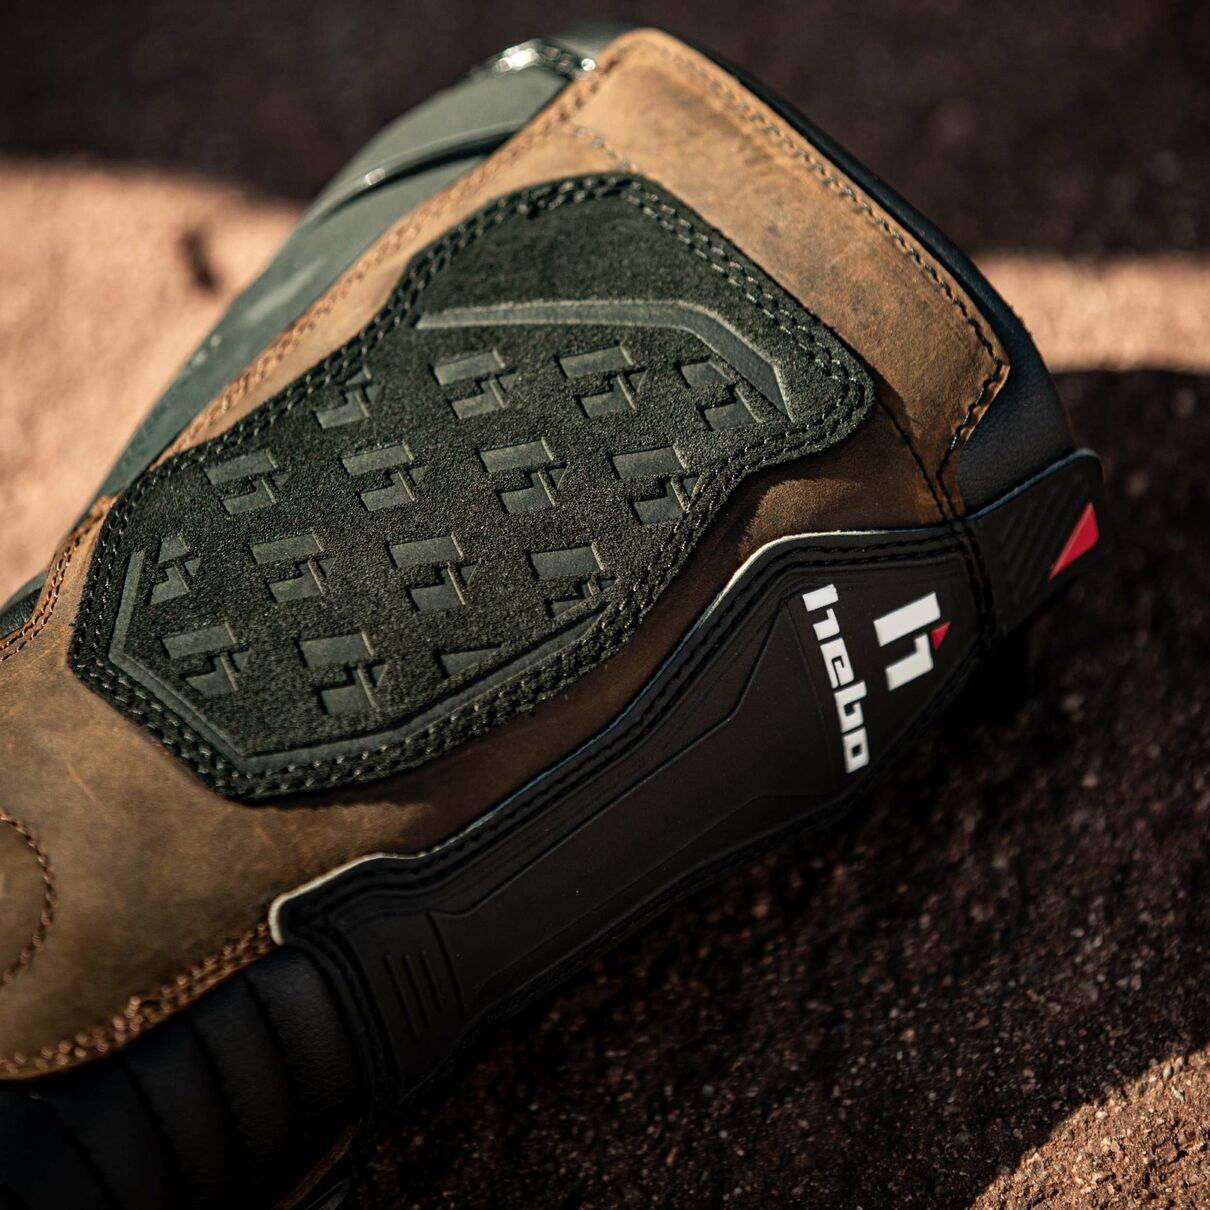 Hebo Trials Boots Technical 3.0 Natural Leather